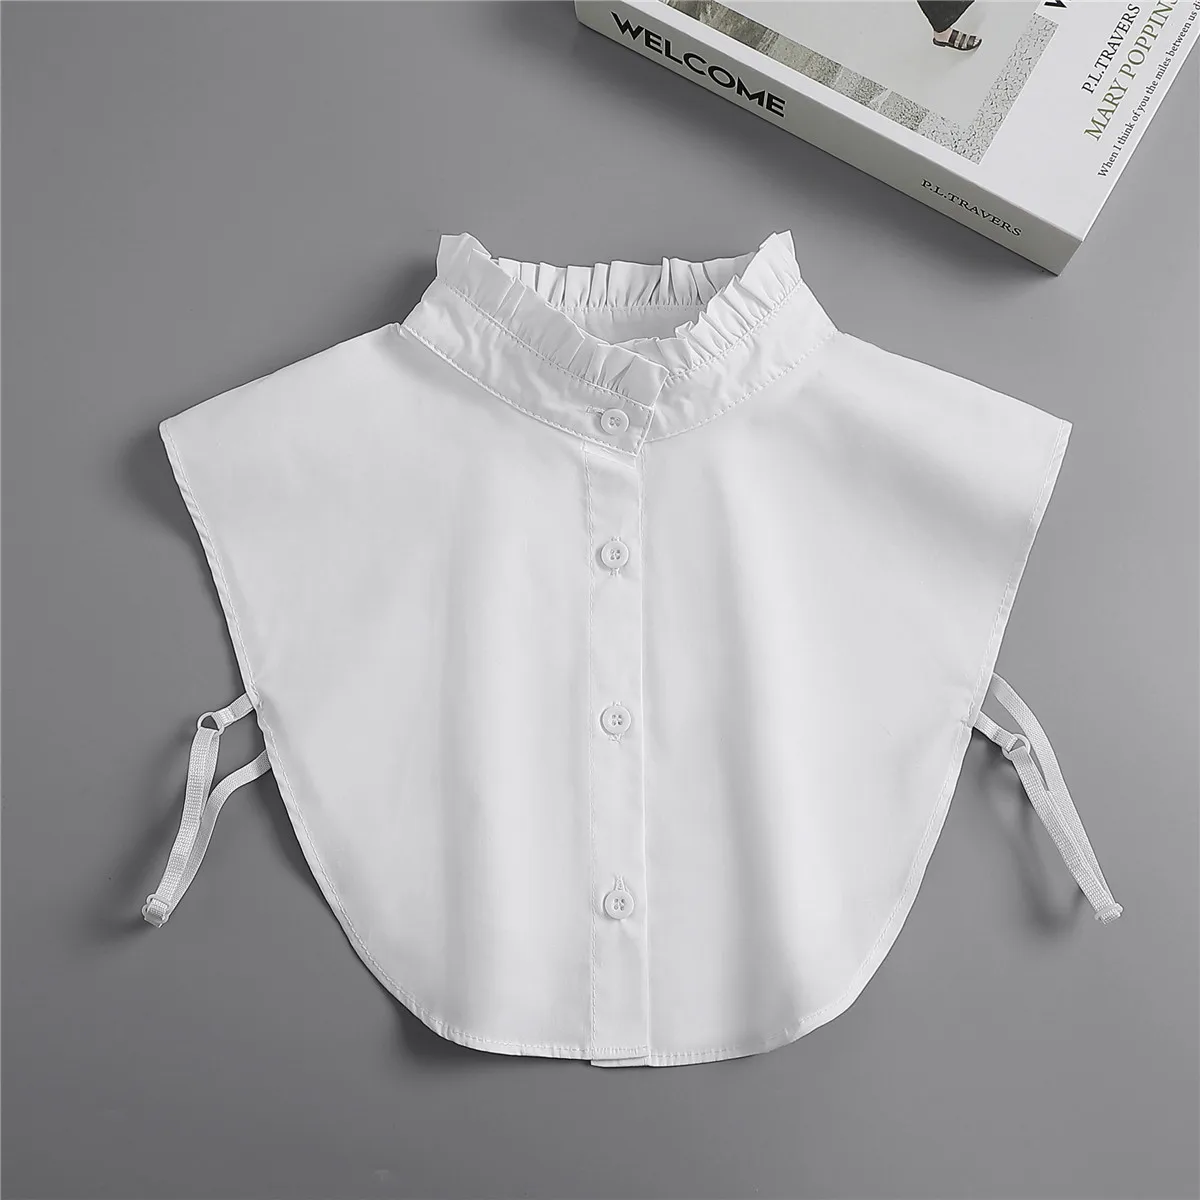 

Sweater Stand Ruffle Shirt Fake Collar for Women White Detachable False Collar Lapel Sweater Blouse Top Removable Faux Collars